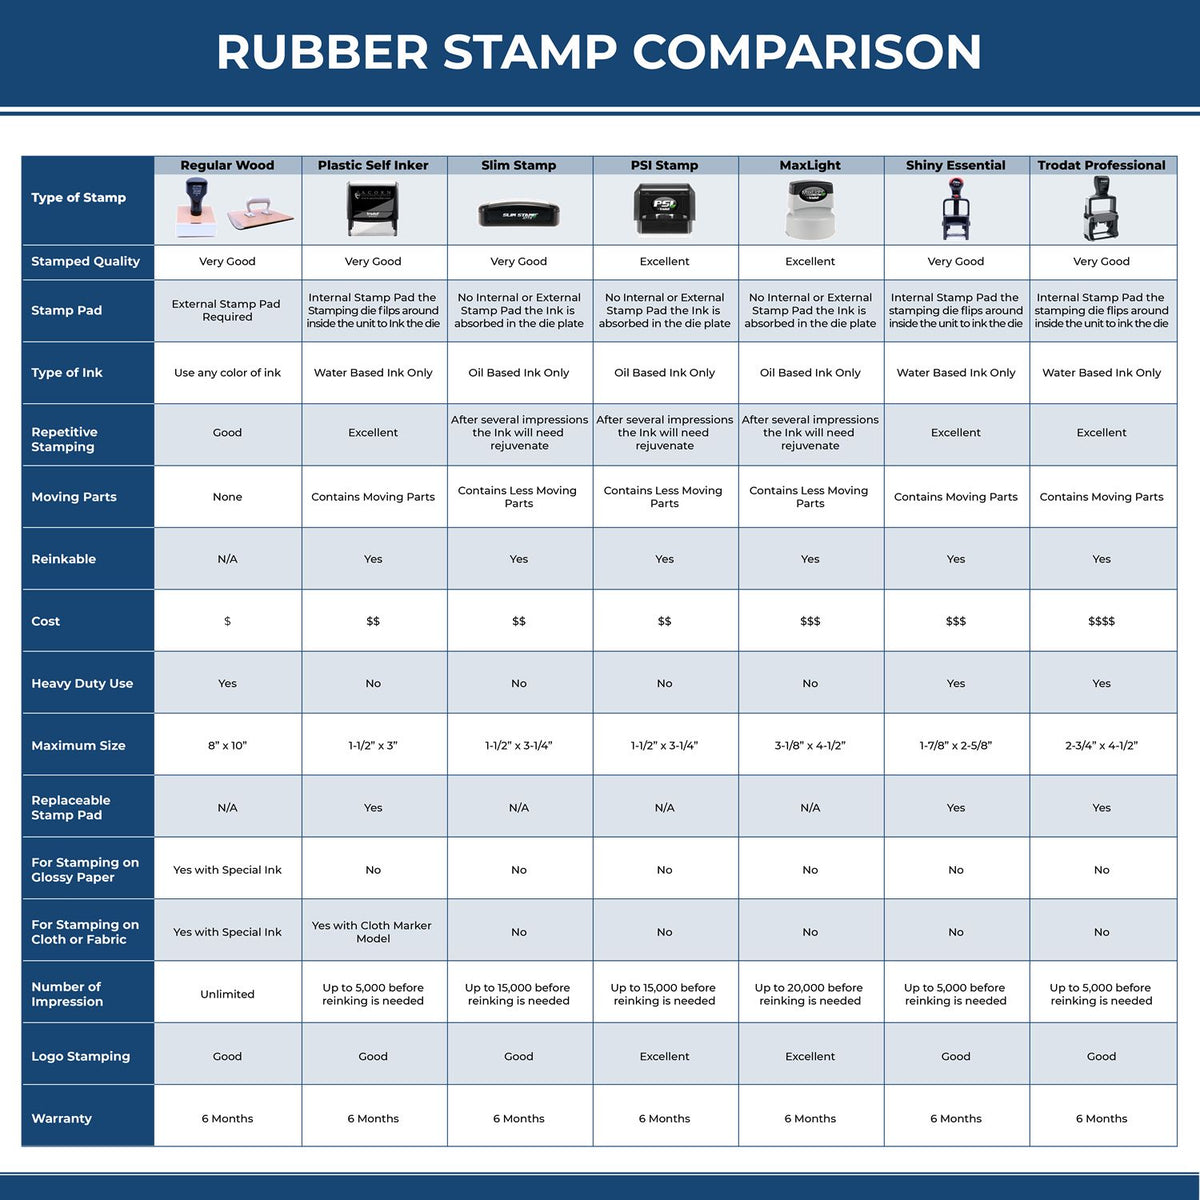 A comparison chart for the different types of mount models available for the Slim Pre-Inked Washington Professional Engineer Seal Stamp.